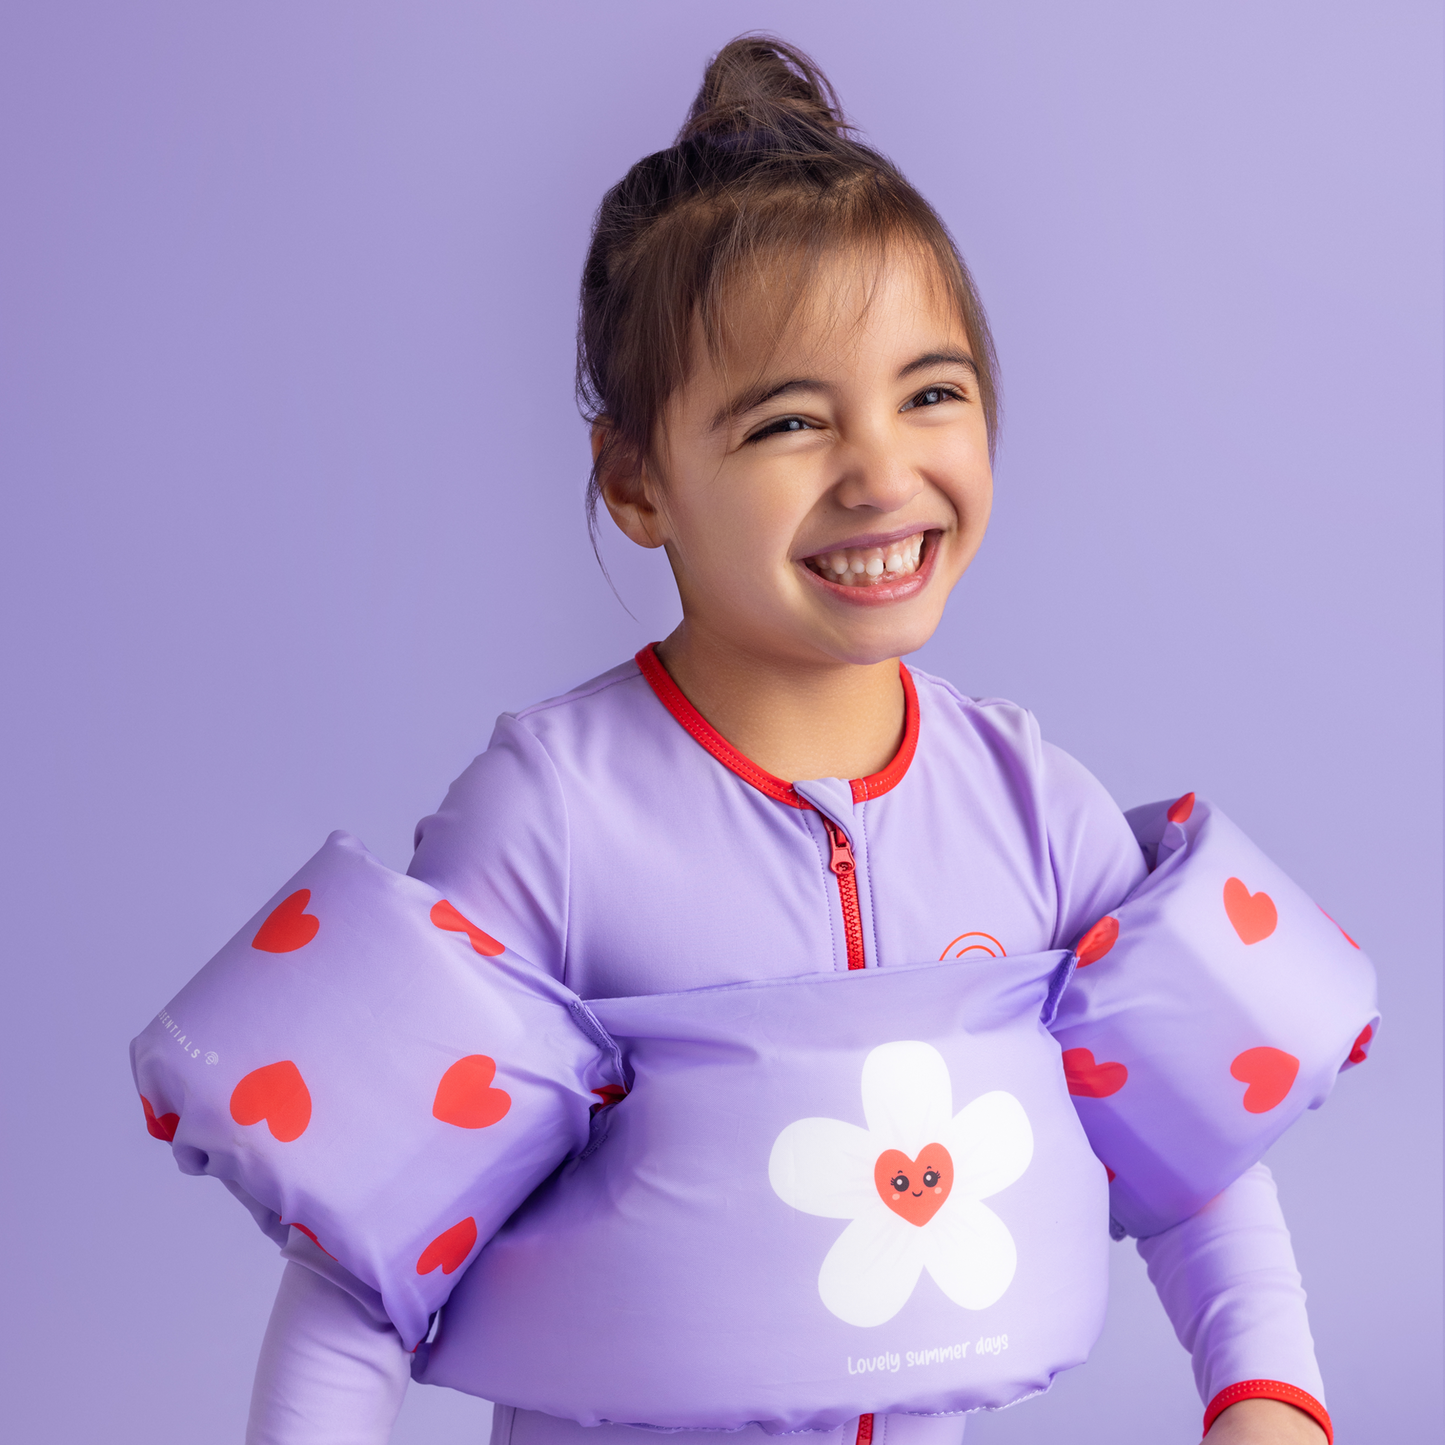 SE Puddle Jumper Lilac Hearts 2-6 years old